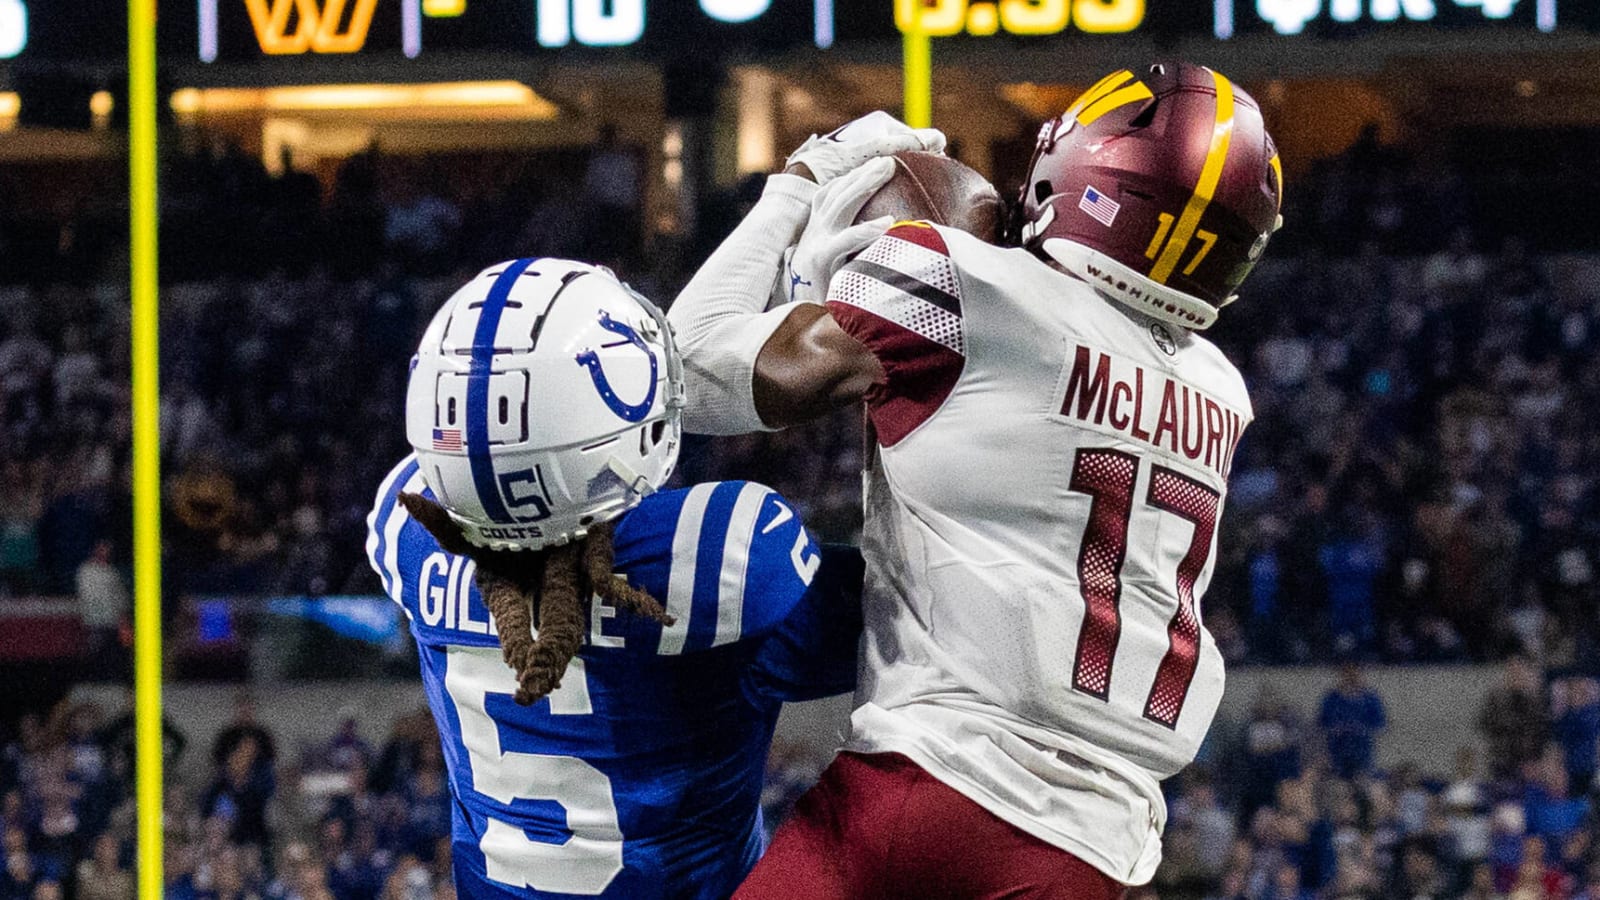 McLaurin 'Mosses' Gilmore to set up game-winning TD